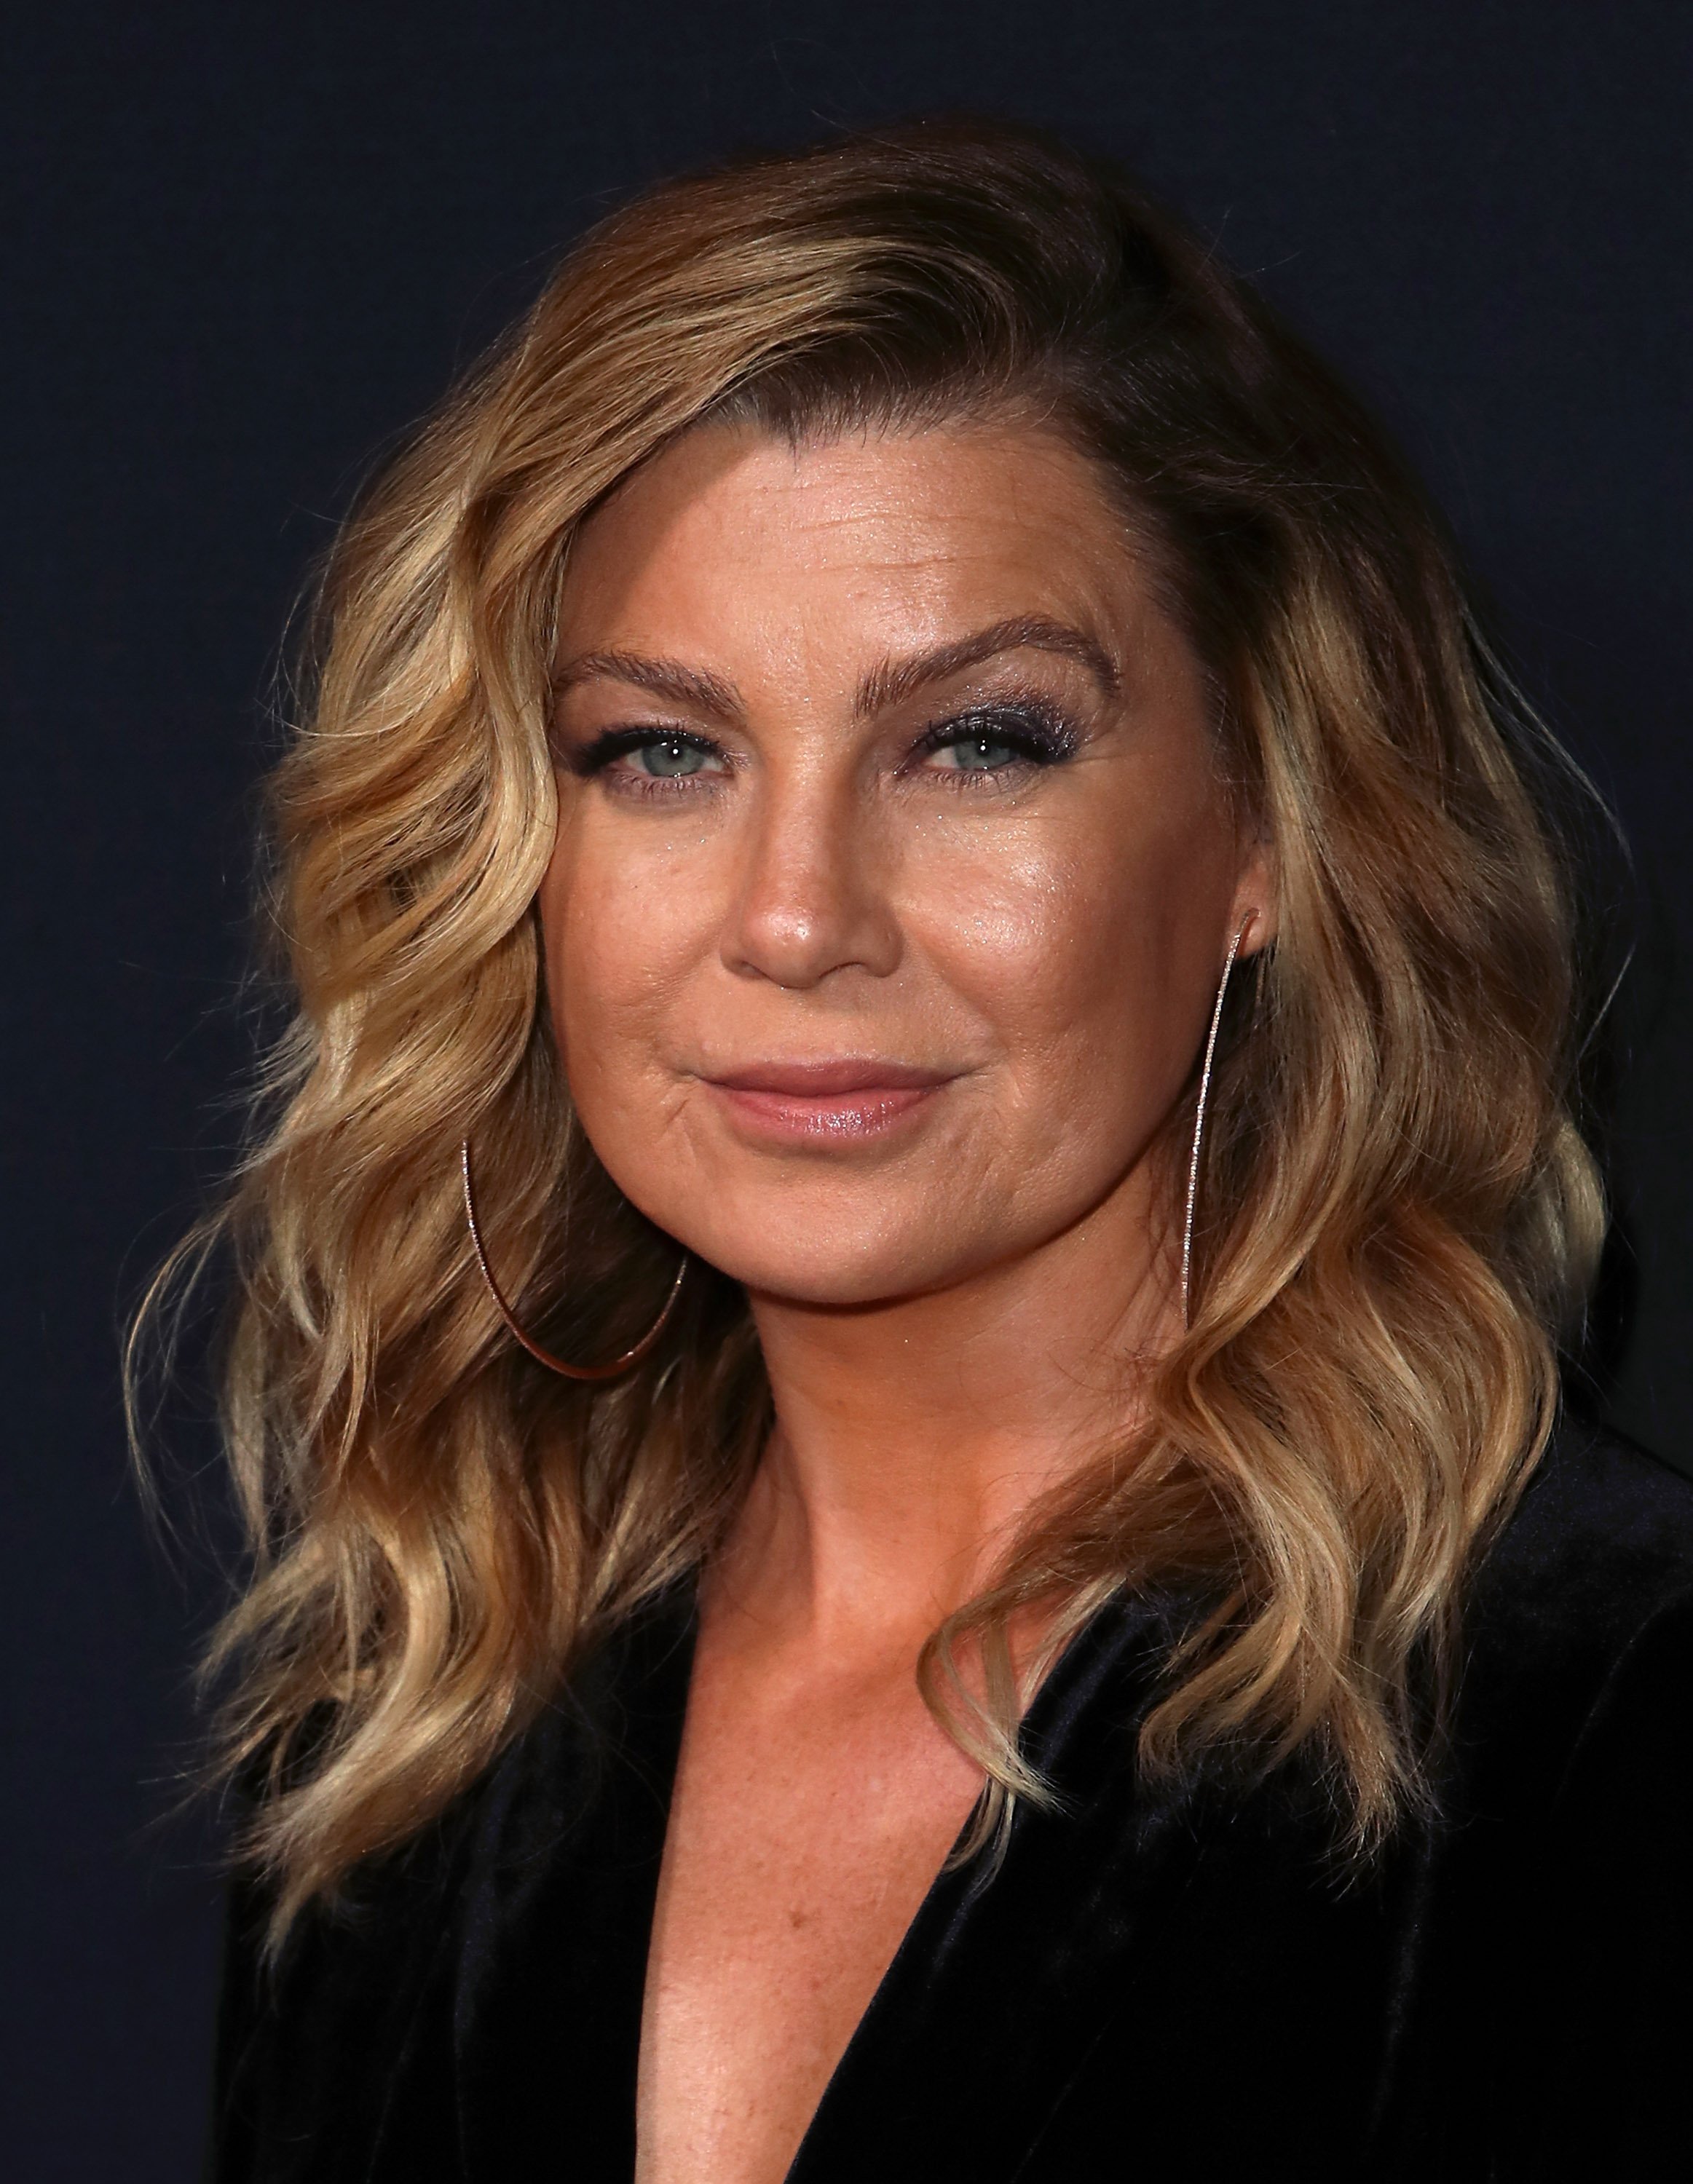 Ellen Pompeo attends the 300th episode celebration for ABC's "Grey's Anatomy" on November 4, 2017, in Los Angeles, California. | Source: Getty Images.